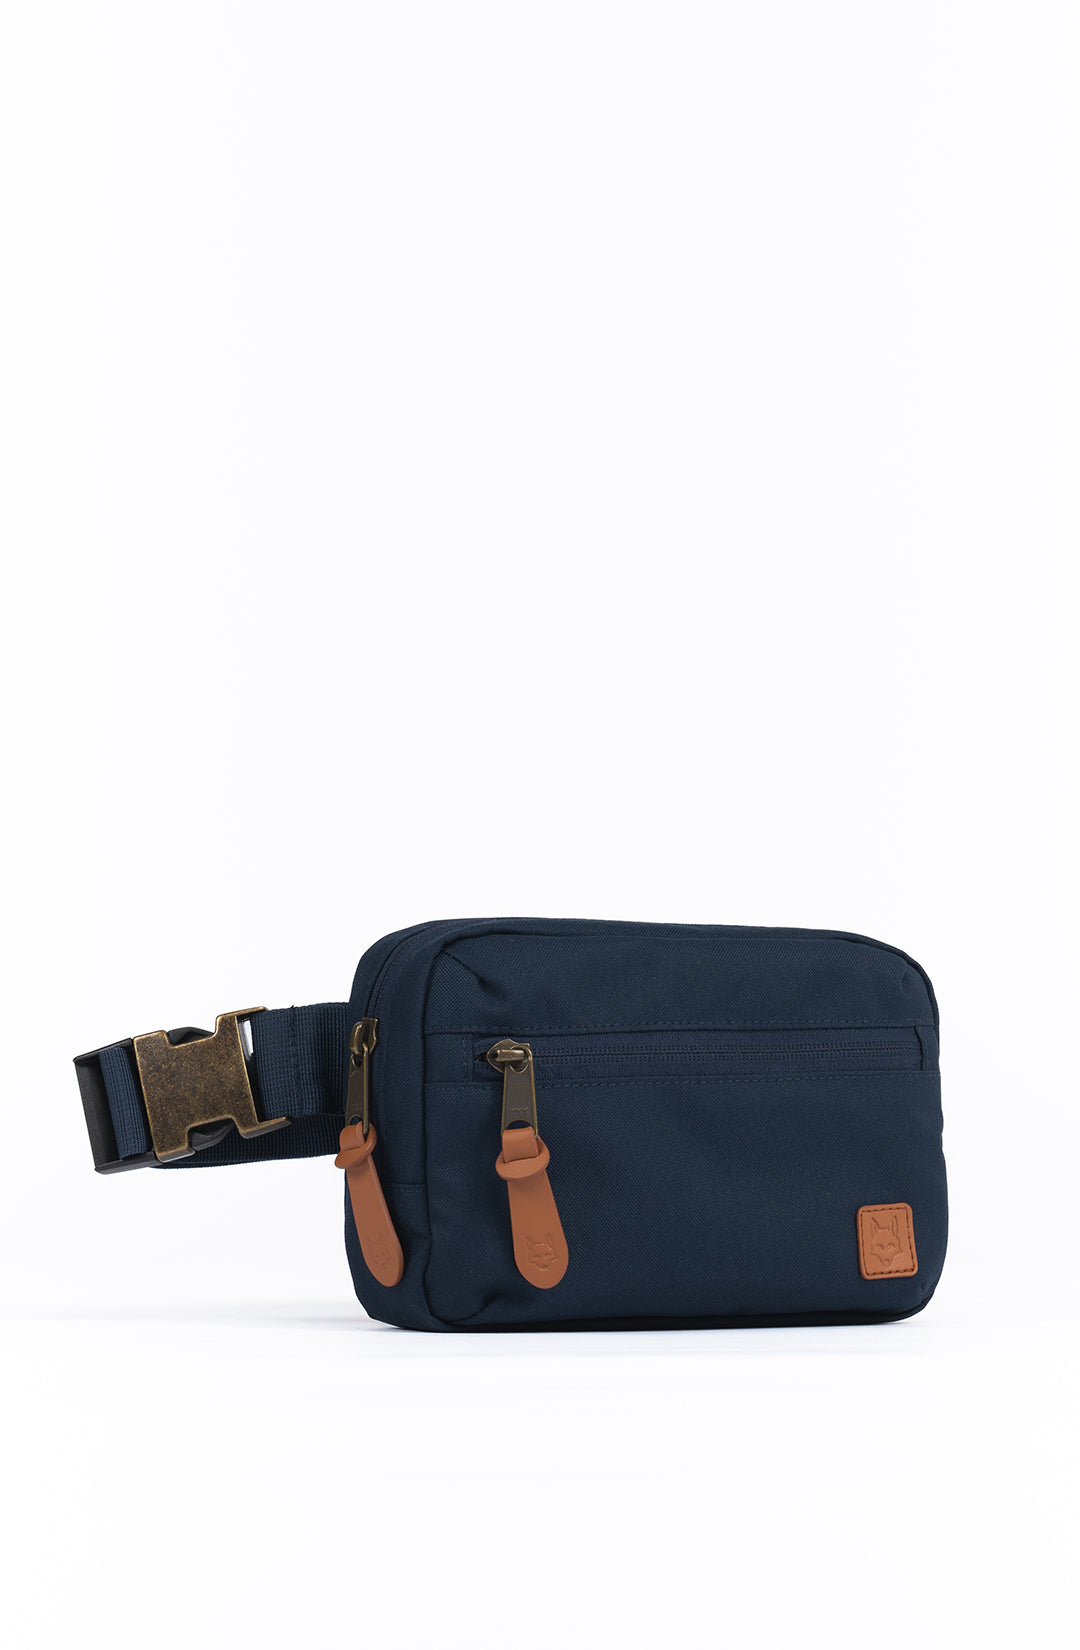 Hip Pack (Navy) – Product of the North Store